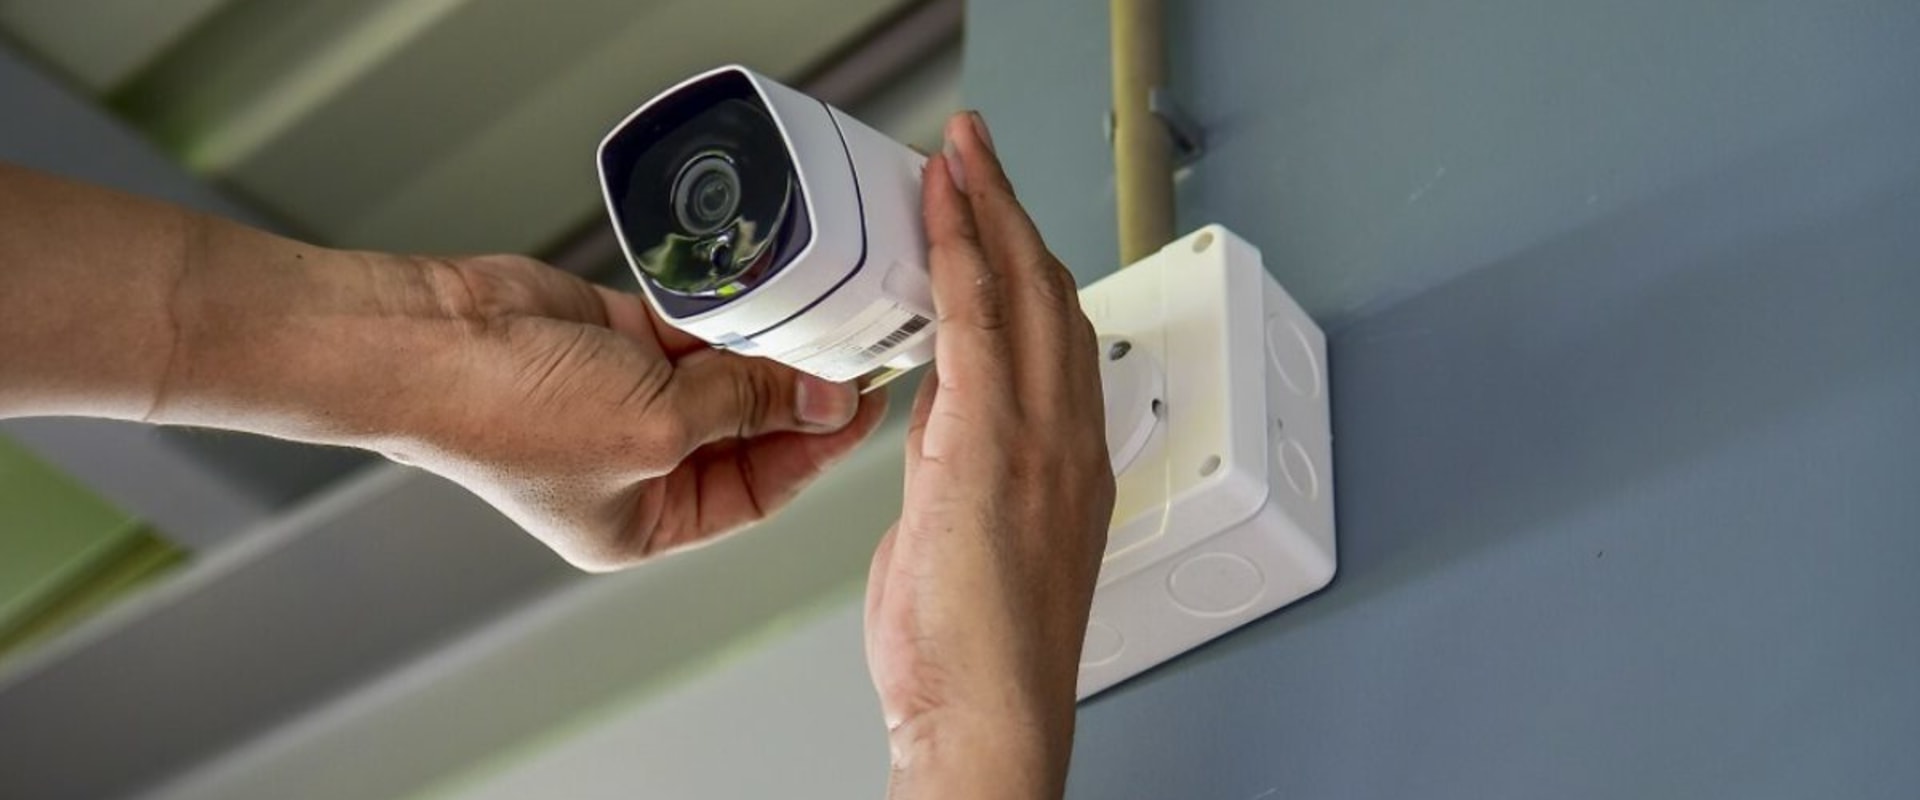 Protecting from Theft and Tampering: How to Choose and Install the Right Security Cameras for Your Home or Business